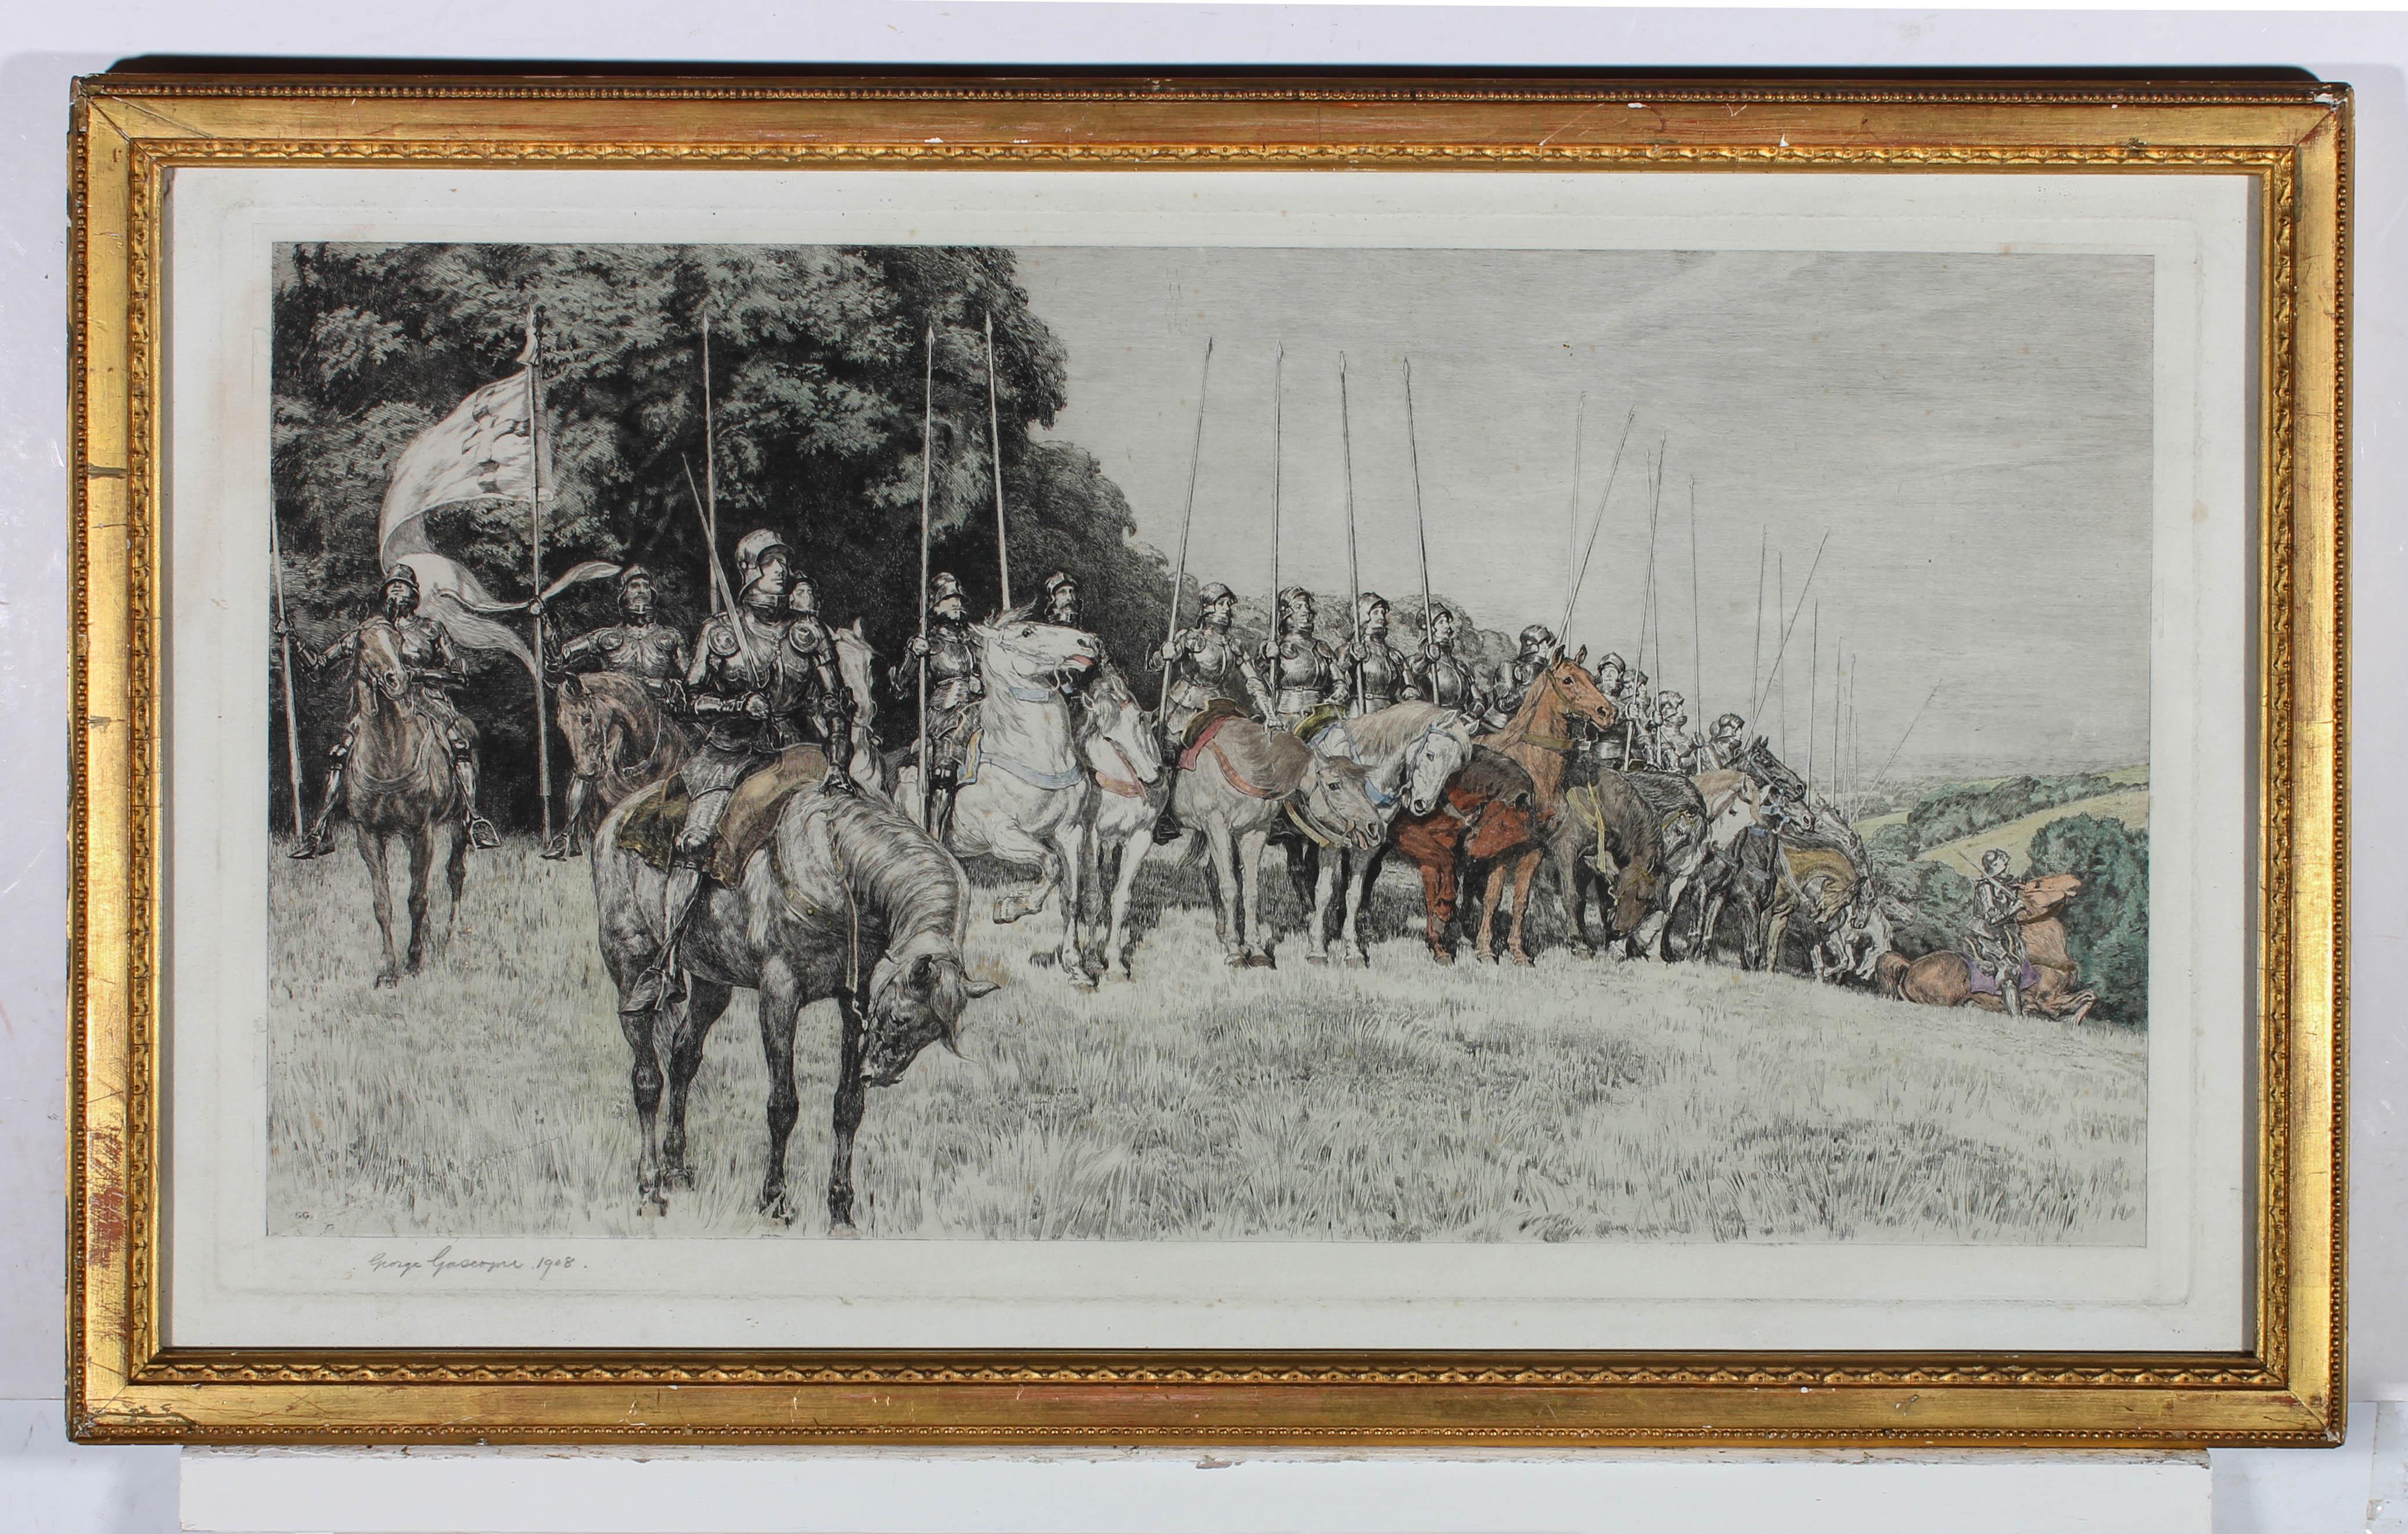 A striking early 20th Century etching by George Gascoyne, after his original 1906 painting. The scene shows a front line of knights on horseback in armour, holding spears and swords. They ready themselves as the sunrises, preparing to charge.